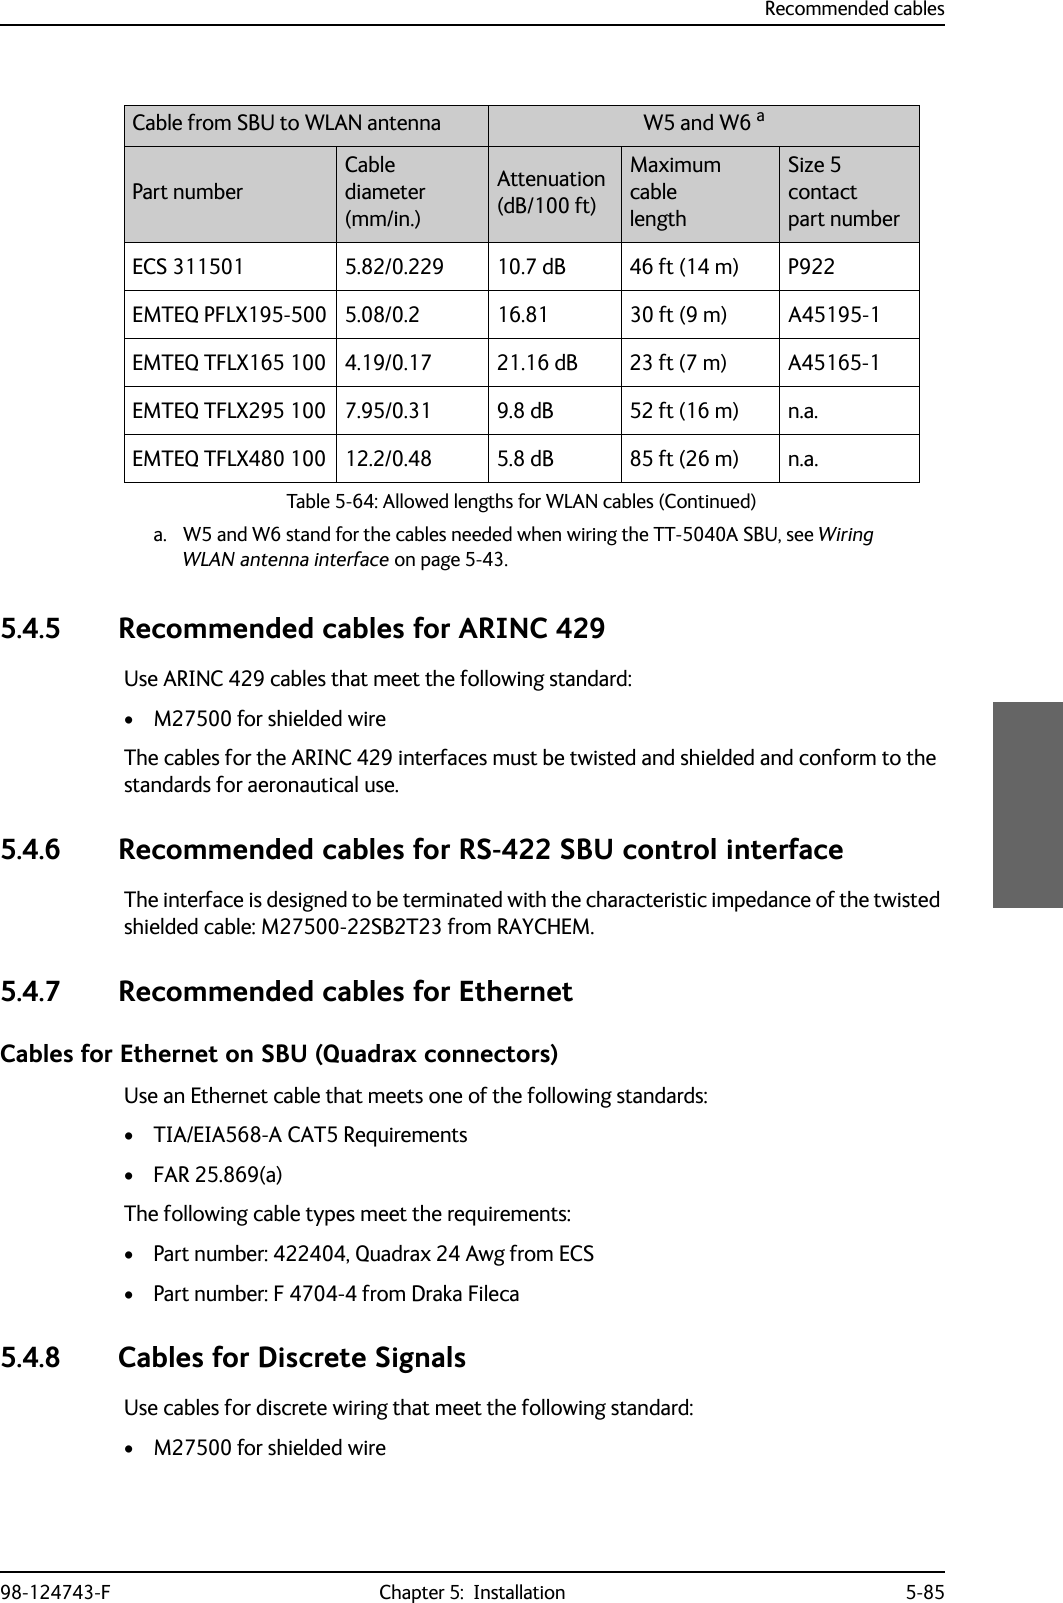 Recommended cables98-124743-F Chapter 5:  Installation 5-855.4.5 Recommended cables for ARINC 429Use ARINC 429 cables that meet the following standard:• M27500 for shielded wireThe cables for the ARINC 429 interfaces must be twisted and shielded and conform to the standards for aeronautical use.5.4.6 Recommended cables for RS-422 SBU control interfaceThe interface is designed to be terminated with the characteristic impedance of the twisted shielded cable: M27500-22SB2T23 from RAYCHEM.5.4.7 Recommended cables for EthernetCables for Ethernet on SBU (Quadrax connectors)Use an Ethernet cable that meets one of the following standards:• TIA/EIA568-A CAT5 Requirements• FAR 25.869(a)The following cable types meet the requirements:• Part number: 422404, Quadrax 24 Awg from ECS• Part number: F 4704-4 from Draka Fileca5.4.8 Cables for Discrete SignalsUse cables for discrete wiring that meet the following standard:• M27500 for shielded wireECS 311501 5.82/0.229 10.7 dB 46 ft (14 m) P922EMTEQ PFLX195-500 5.08/0.2 16.81 30 ft (9 m) A45195-1EMTEQ TFLX165 100 4.19/0.17 21.16 dB 23 ft (7 m) A45165-1EMTEQ TFLX295 100 7.95/0.31 9.8 dB 52 ft (16 m) n.a.EMTEQ TFLX480 100 12.2/0.48 5.8 dB 85 ft (26 m) n.a.a. W5 and W6 stand for the cables needed when wiring the TT-5040A SBU, see Wiring WLAN antenna interface on page 5-43.Cable from SBU to WLAN antenna  W5 and W6 aPart numberCable diameter(mm/in.)Attenuation(dB/100 ft)Maximum cablelengthSize 5 contactpart numberTable 5-64: Allowed lengths for WLAN cables (Continued)